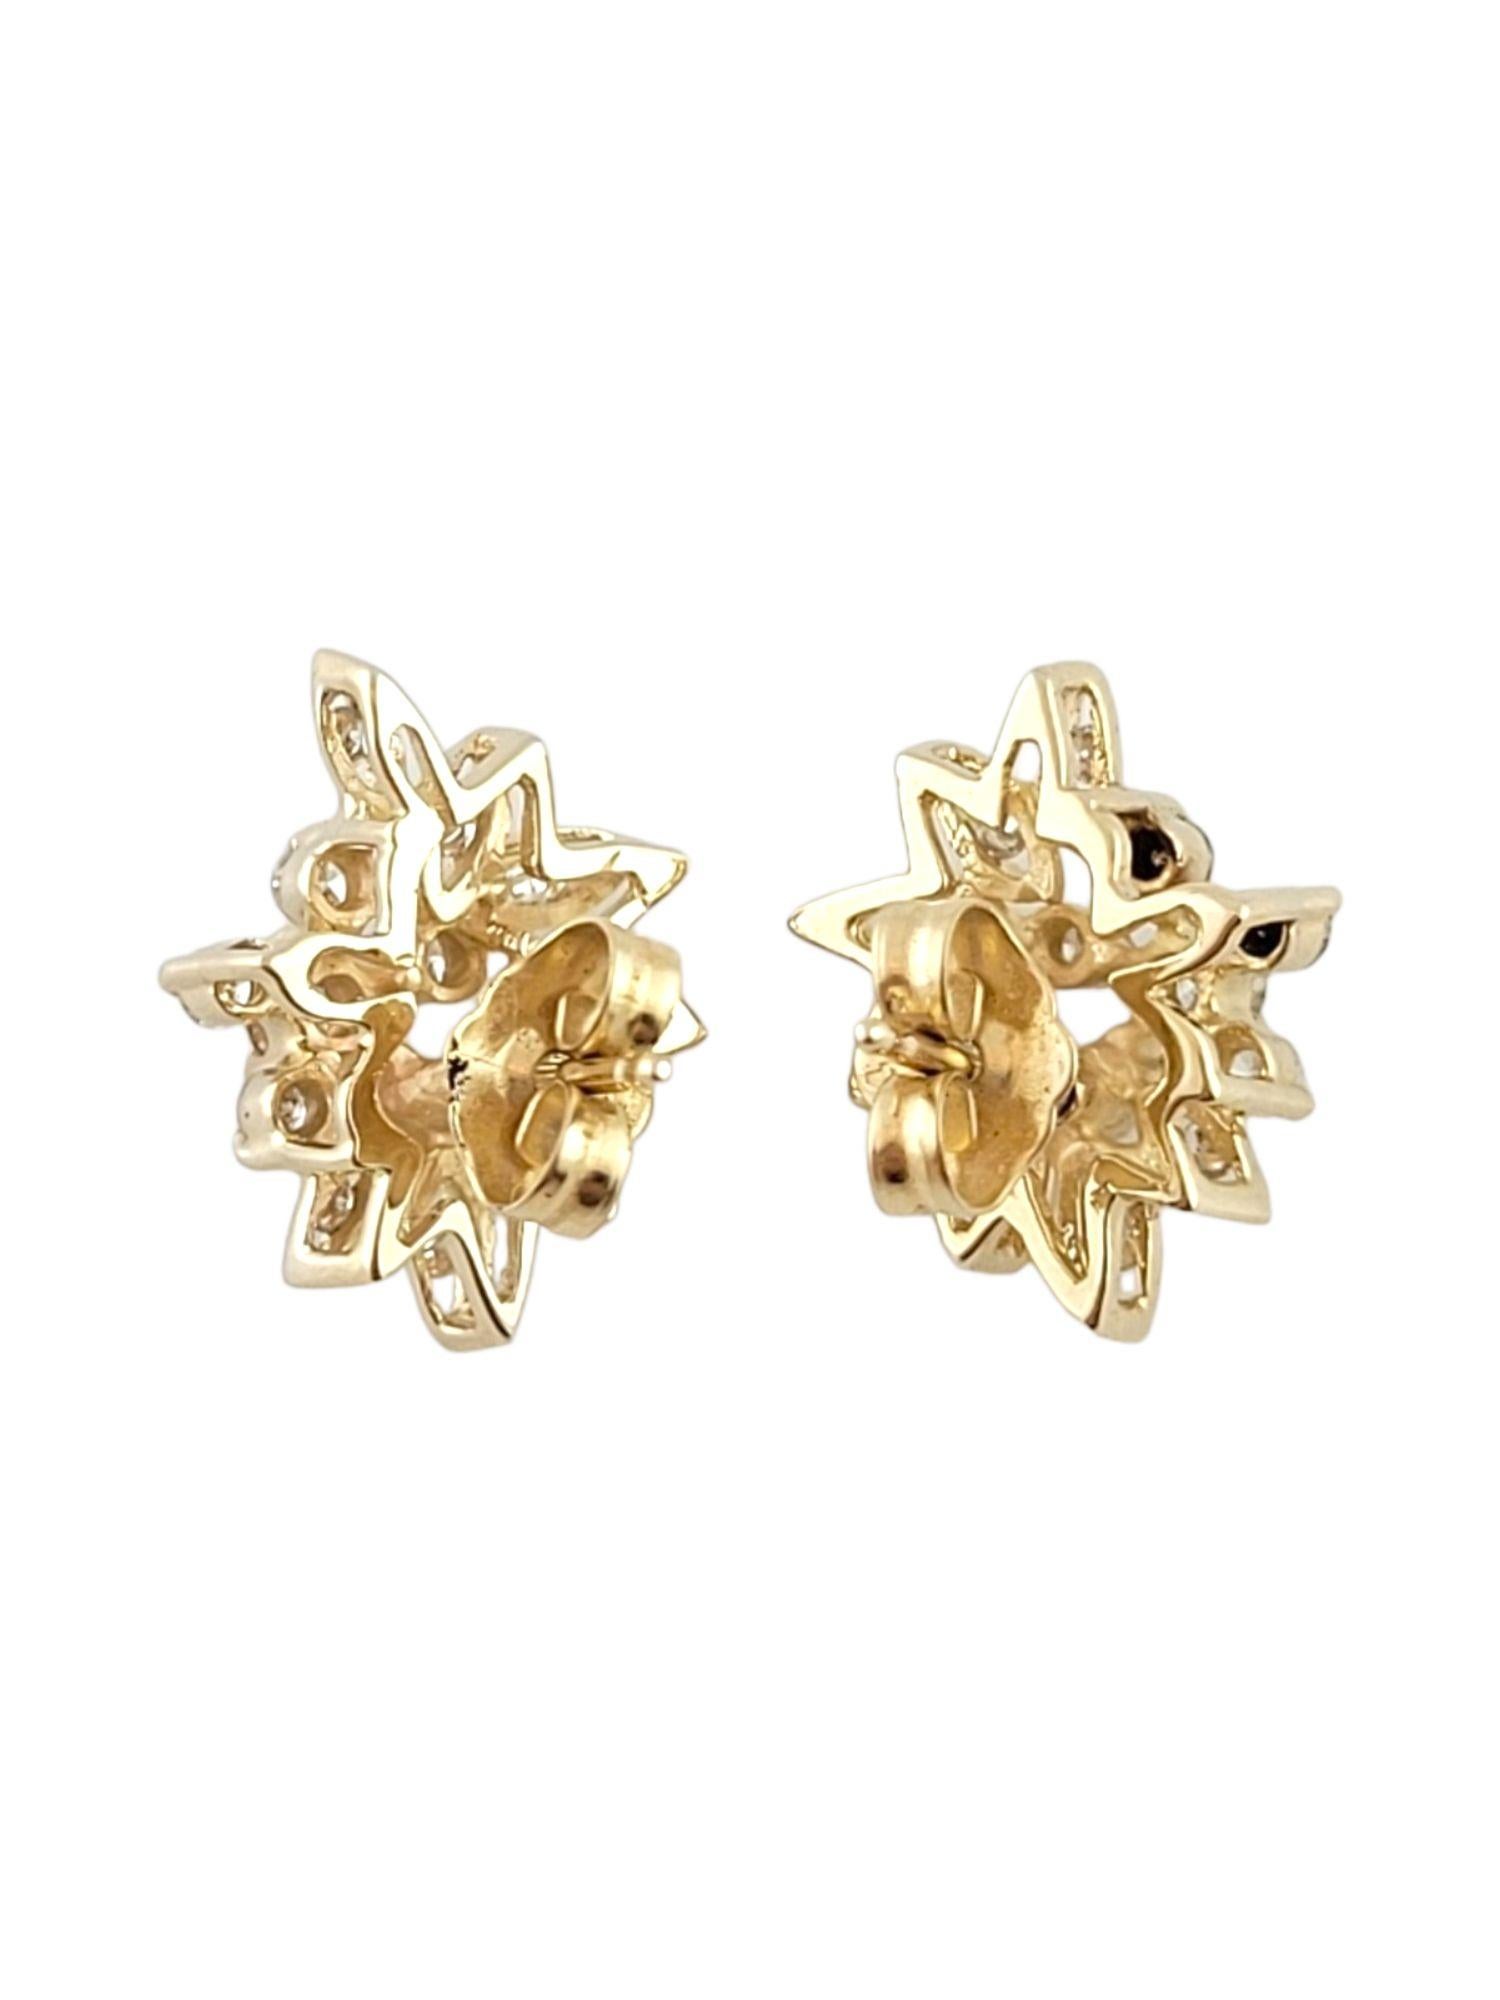 This gorgeous set of earrings features 26  sparkling, round brilliant cut diamonds set in 14K yellow gold!

(13 diamonds each earring, 26 total)

Approximate total diamond weight: .50 cts

Diamond clarity: SI1-I1

Diamond color: G

Size: 14.3mm X